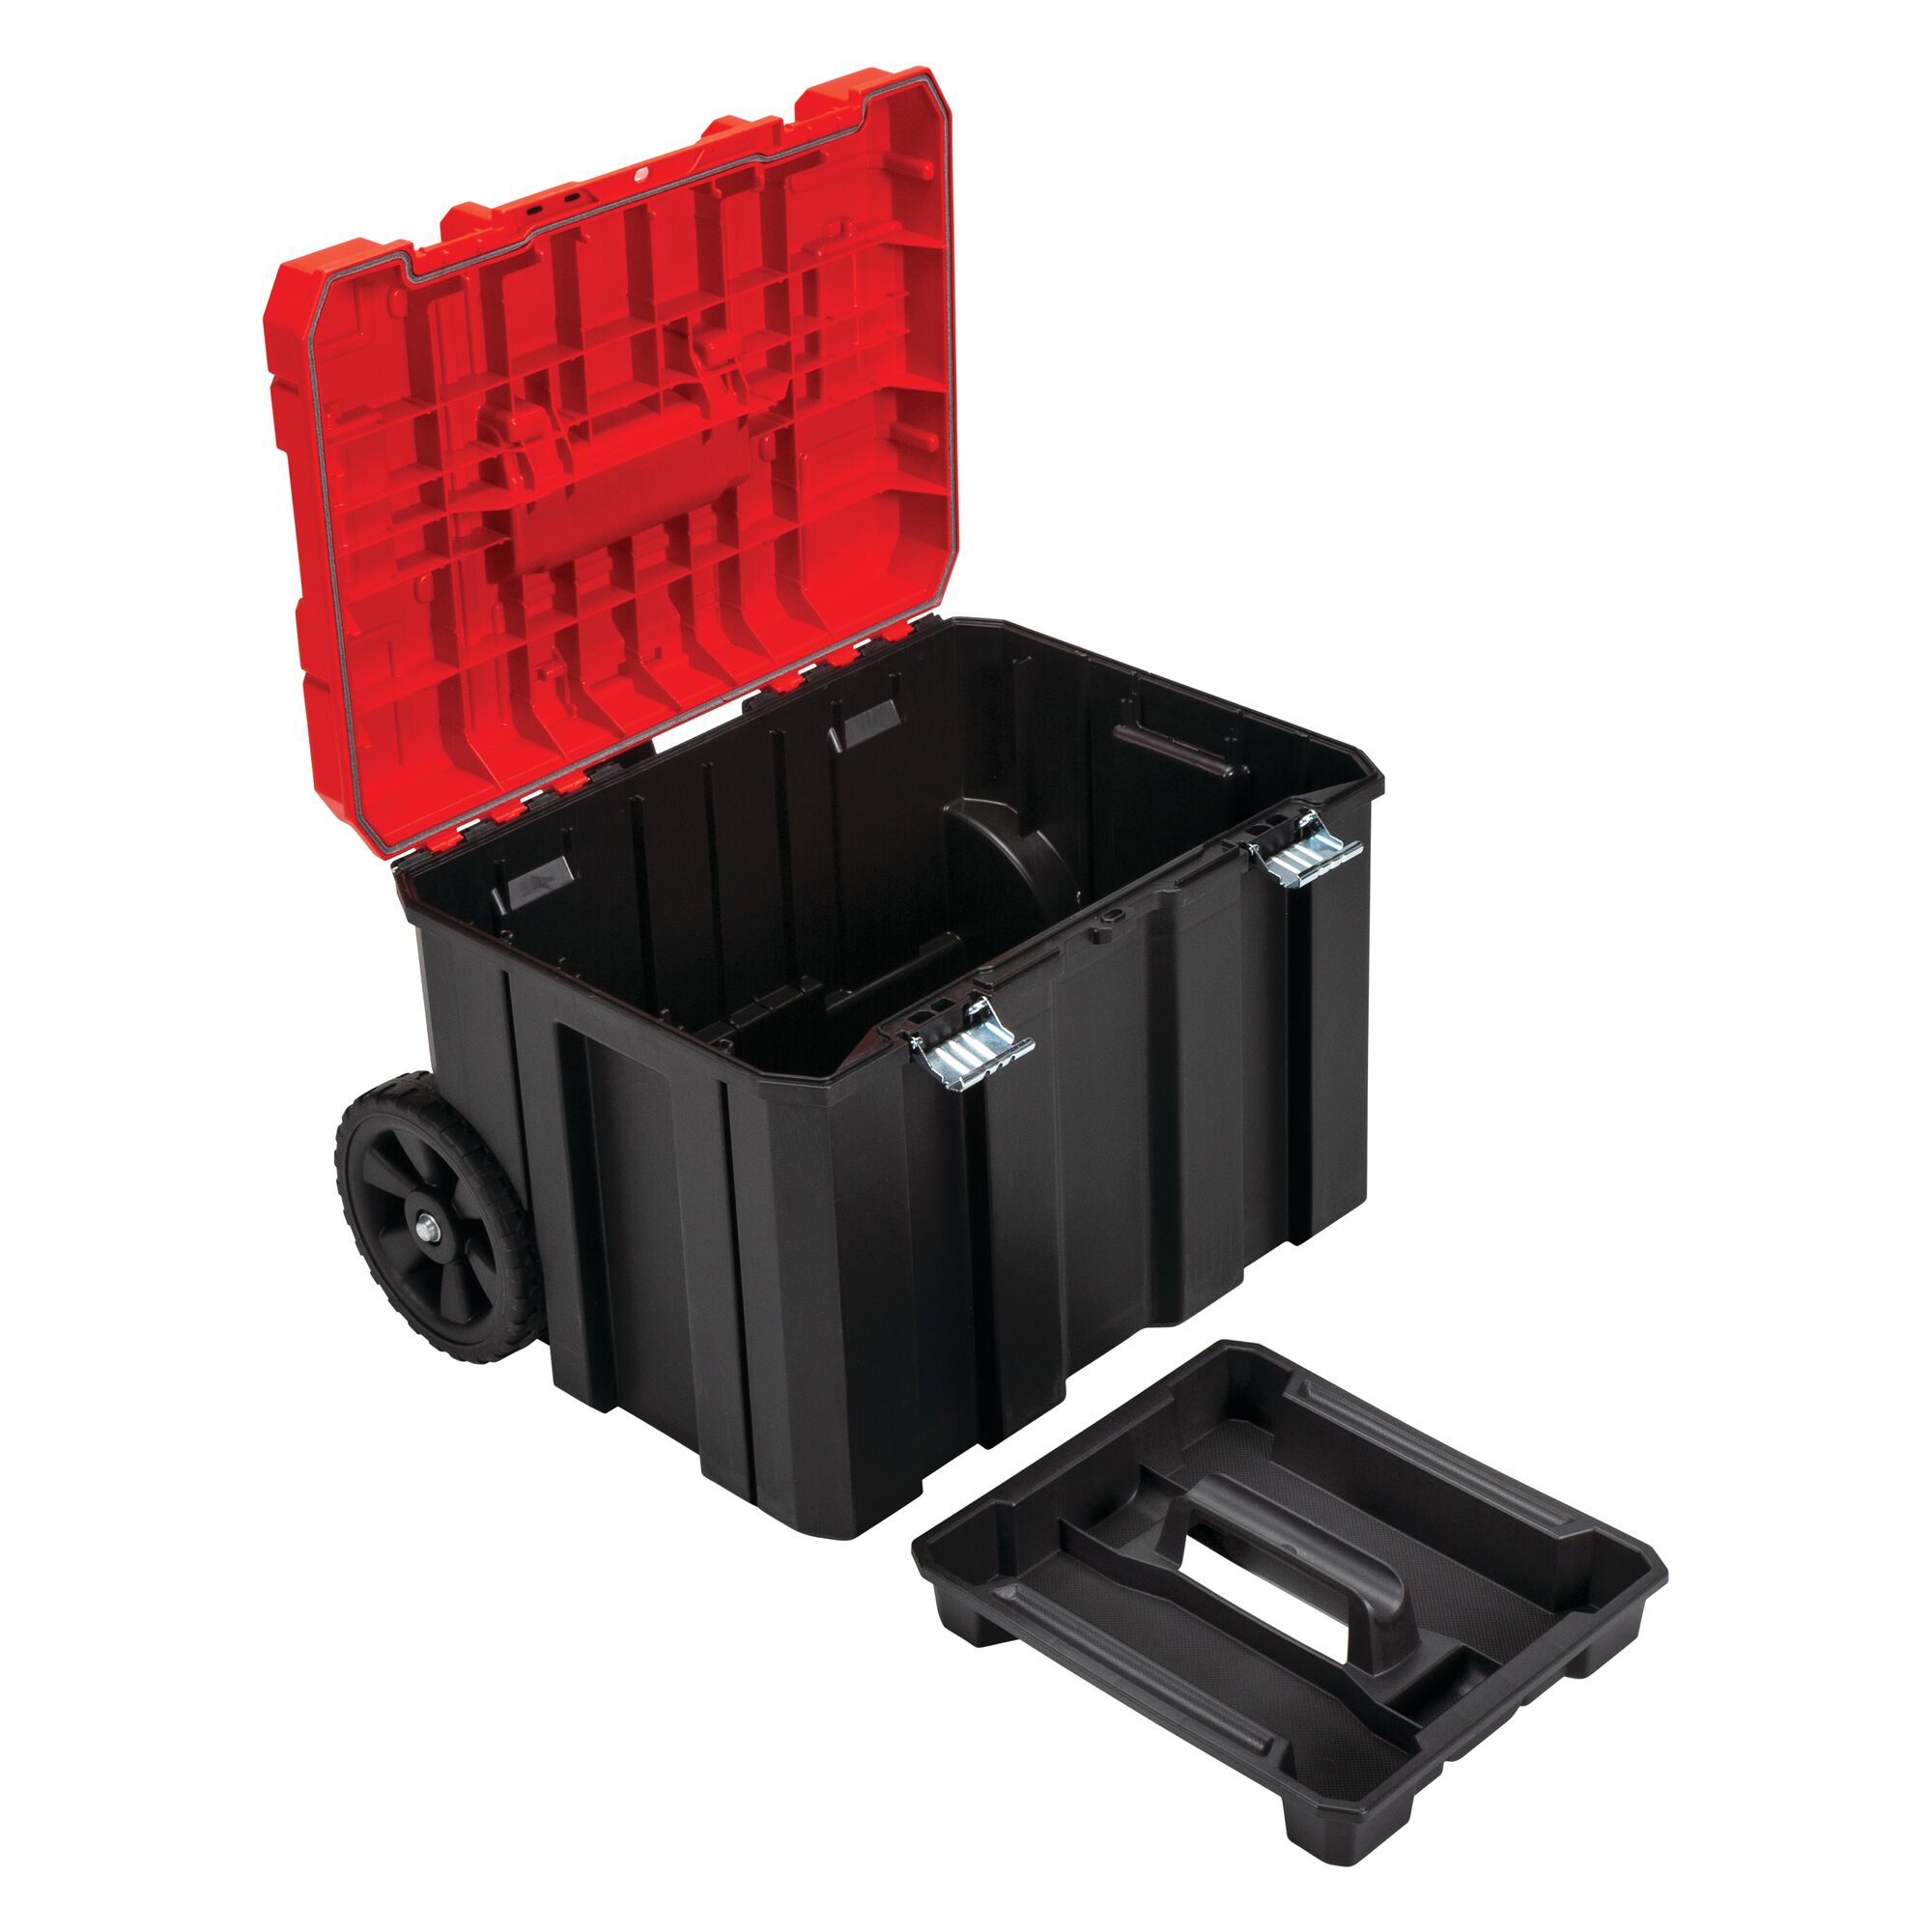 Removable tray feature of Versastack system 20 inch red plastic wheeled lockable tool box.